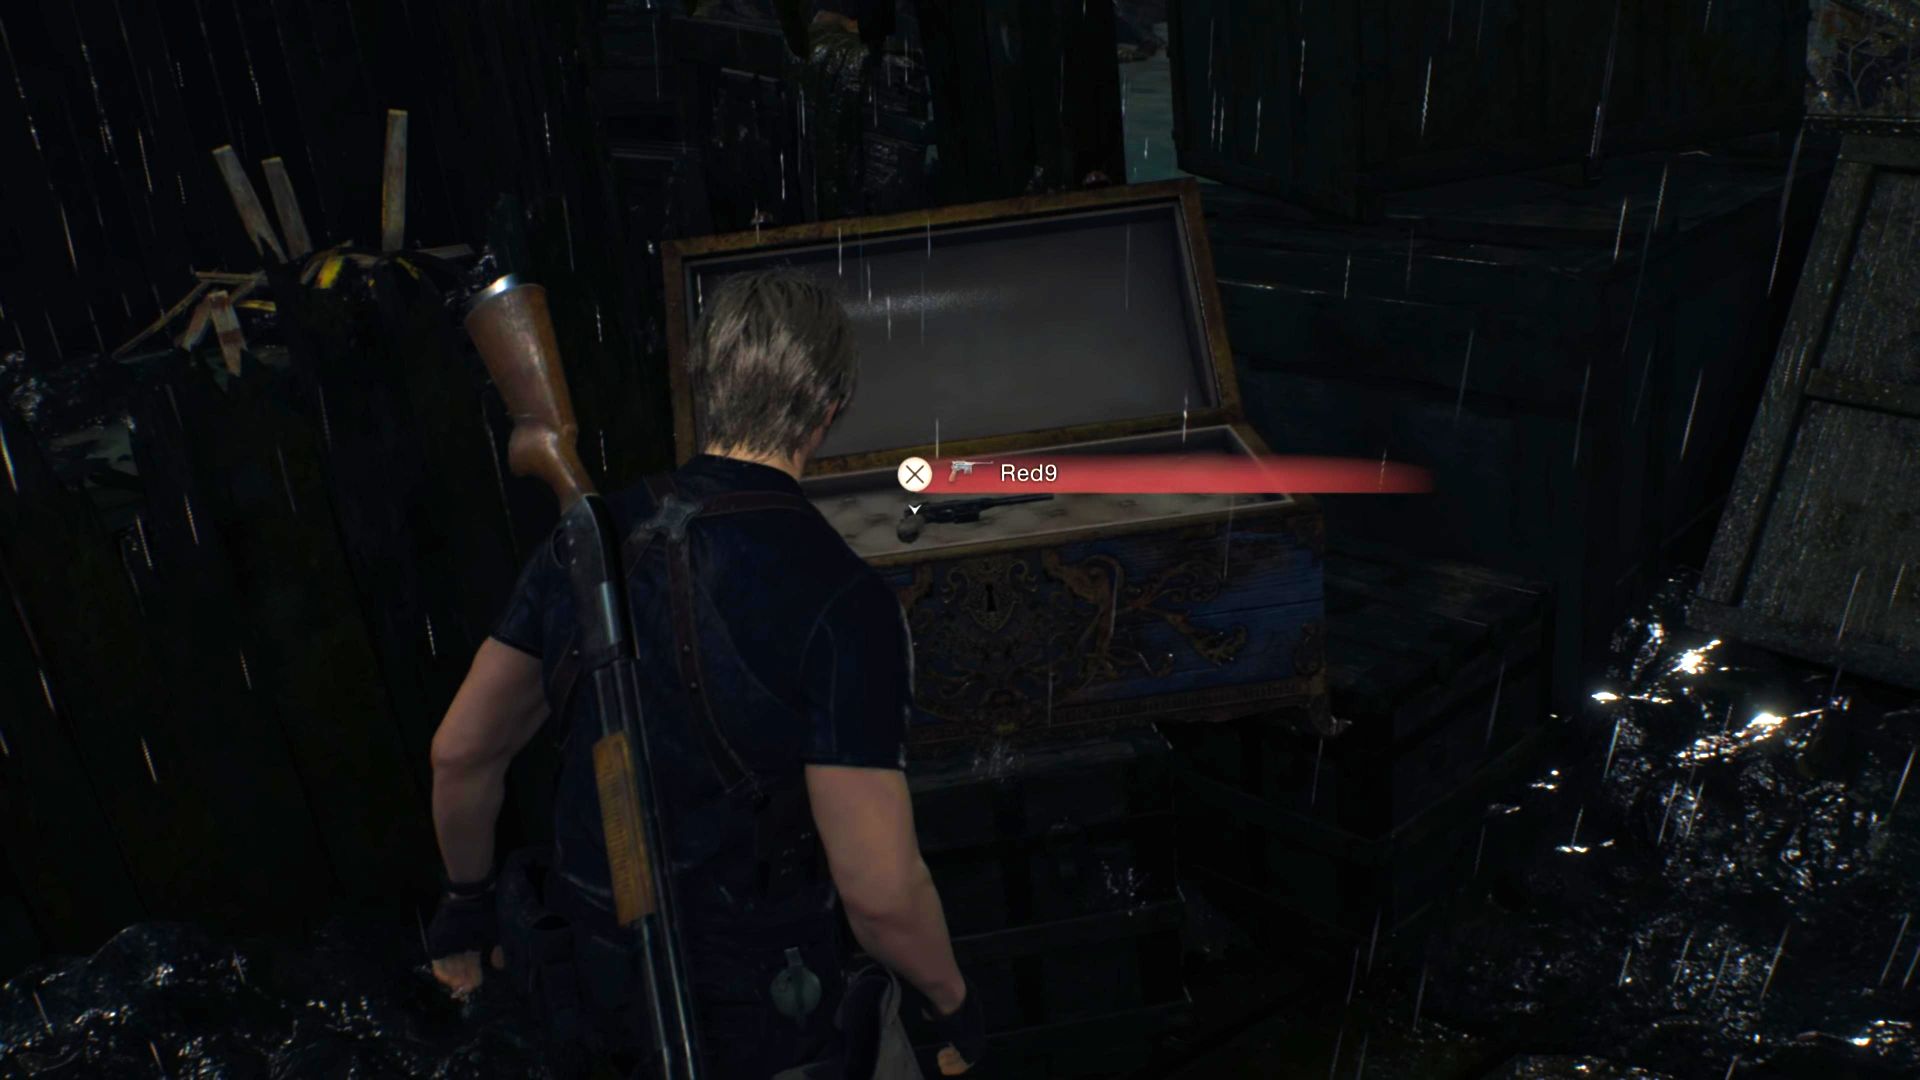 Resident Evil 4 Remake Red9 location: Leon stands before the blue chest containing the Red9 on the deck of the dilapidated boat in the middle of the lake.